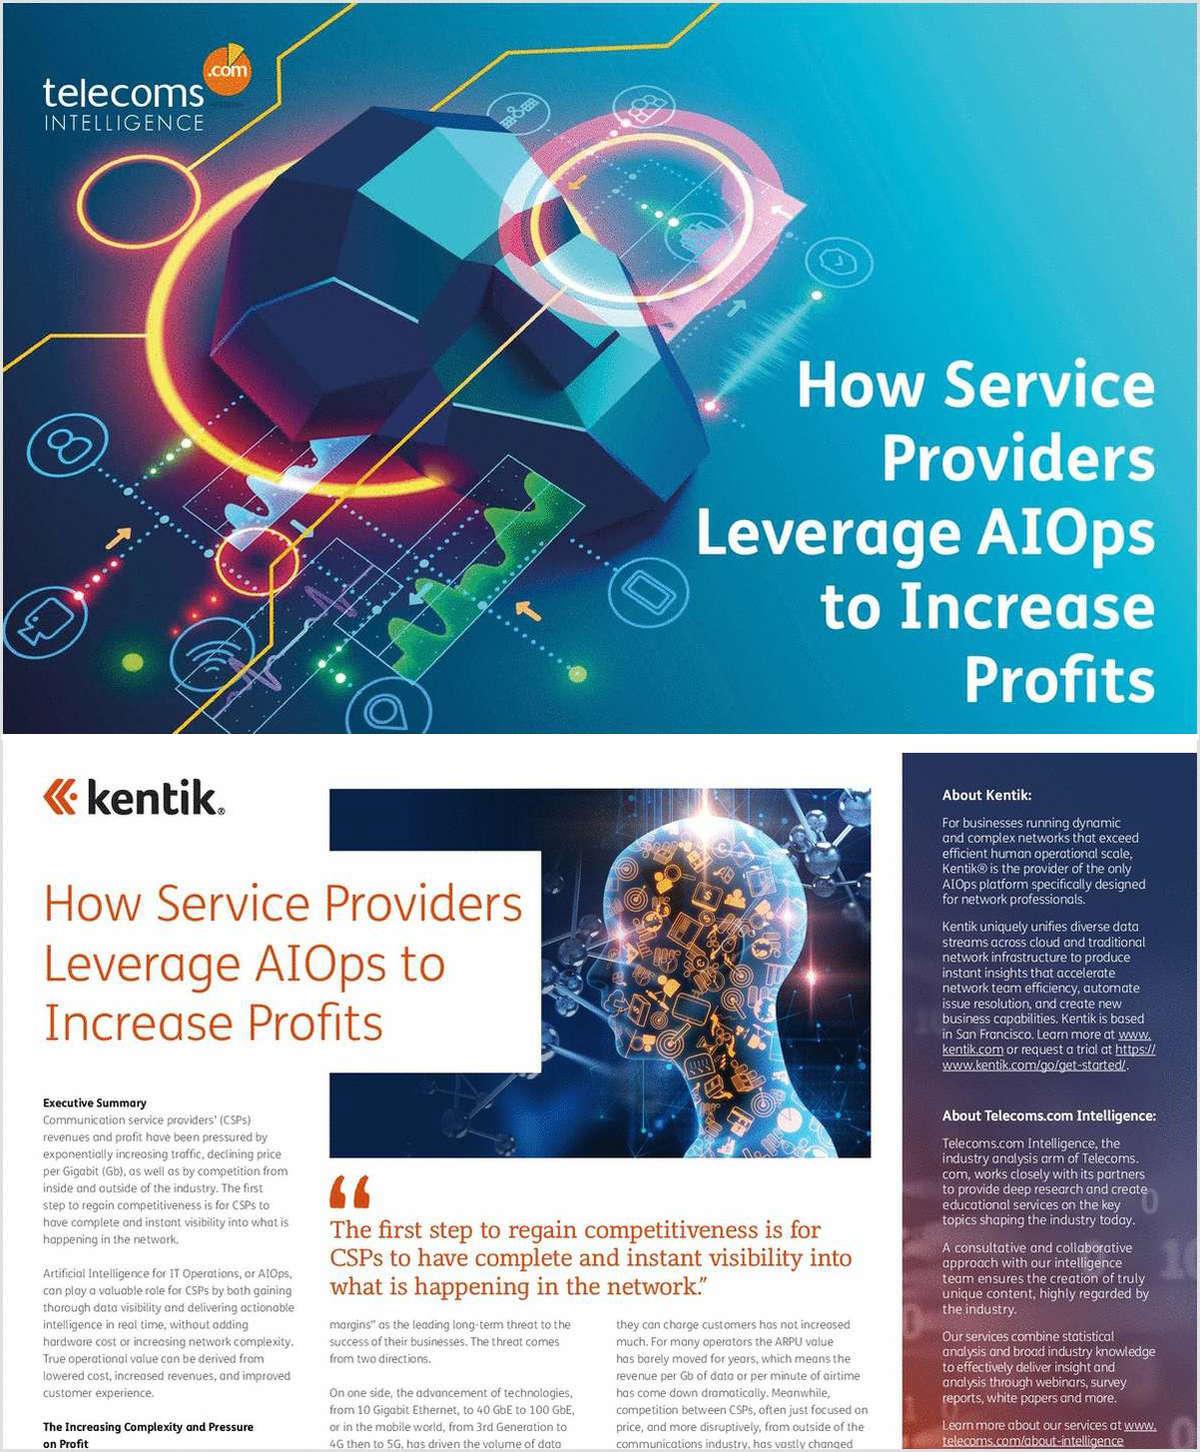 How Network Service Providers Leverage AIOps to Increase Profits